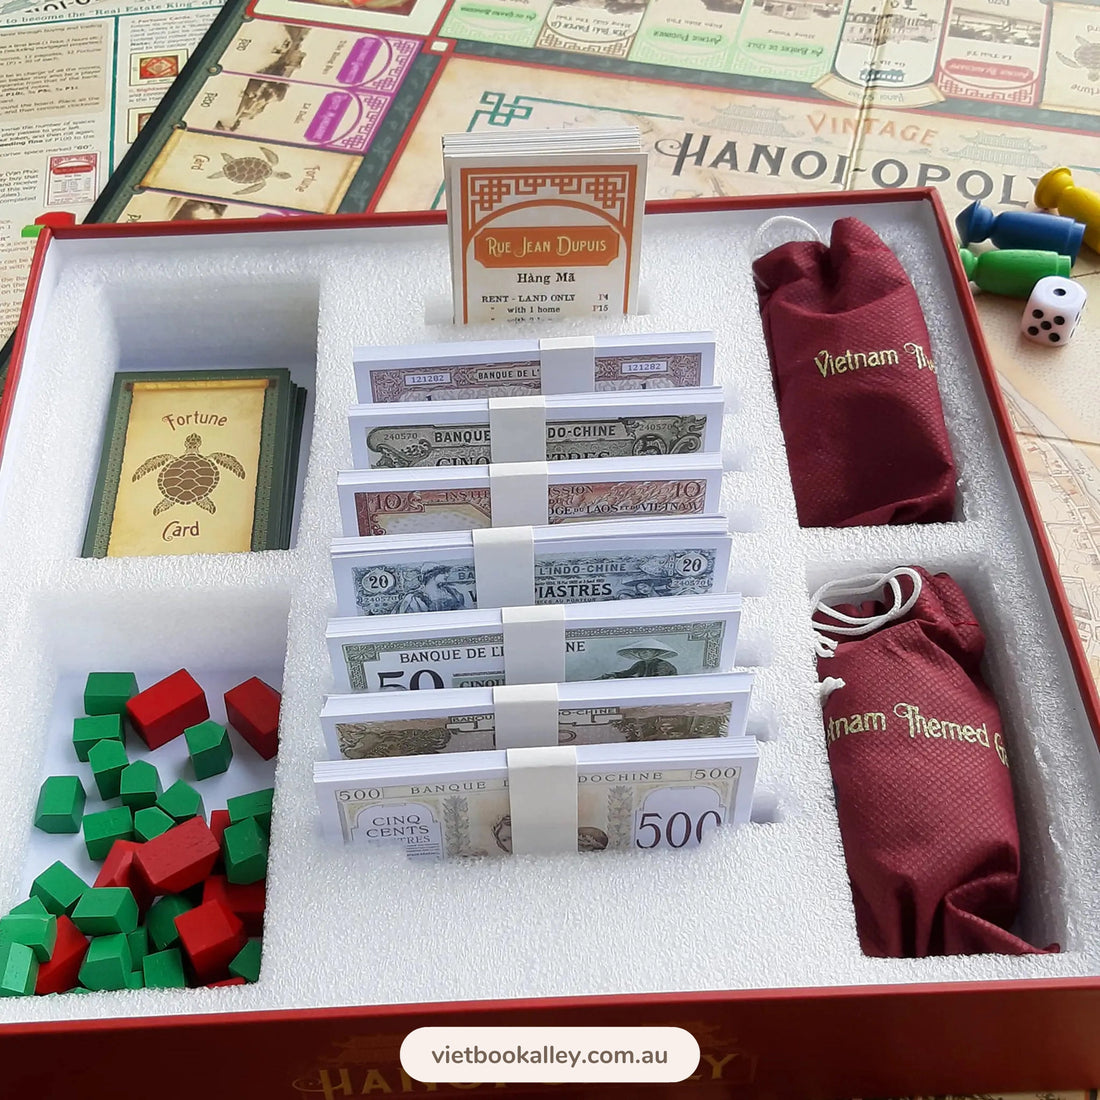 Vintage Hanoi Opoly (Board game)